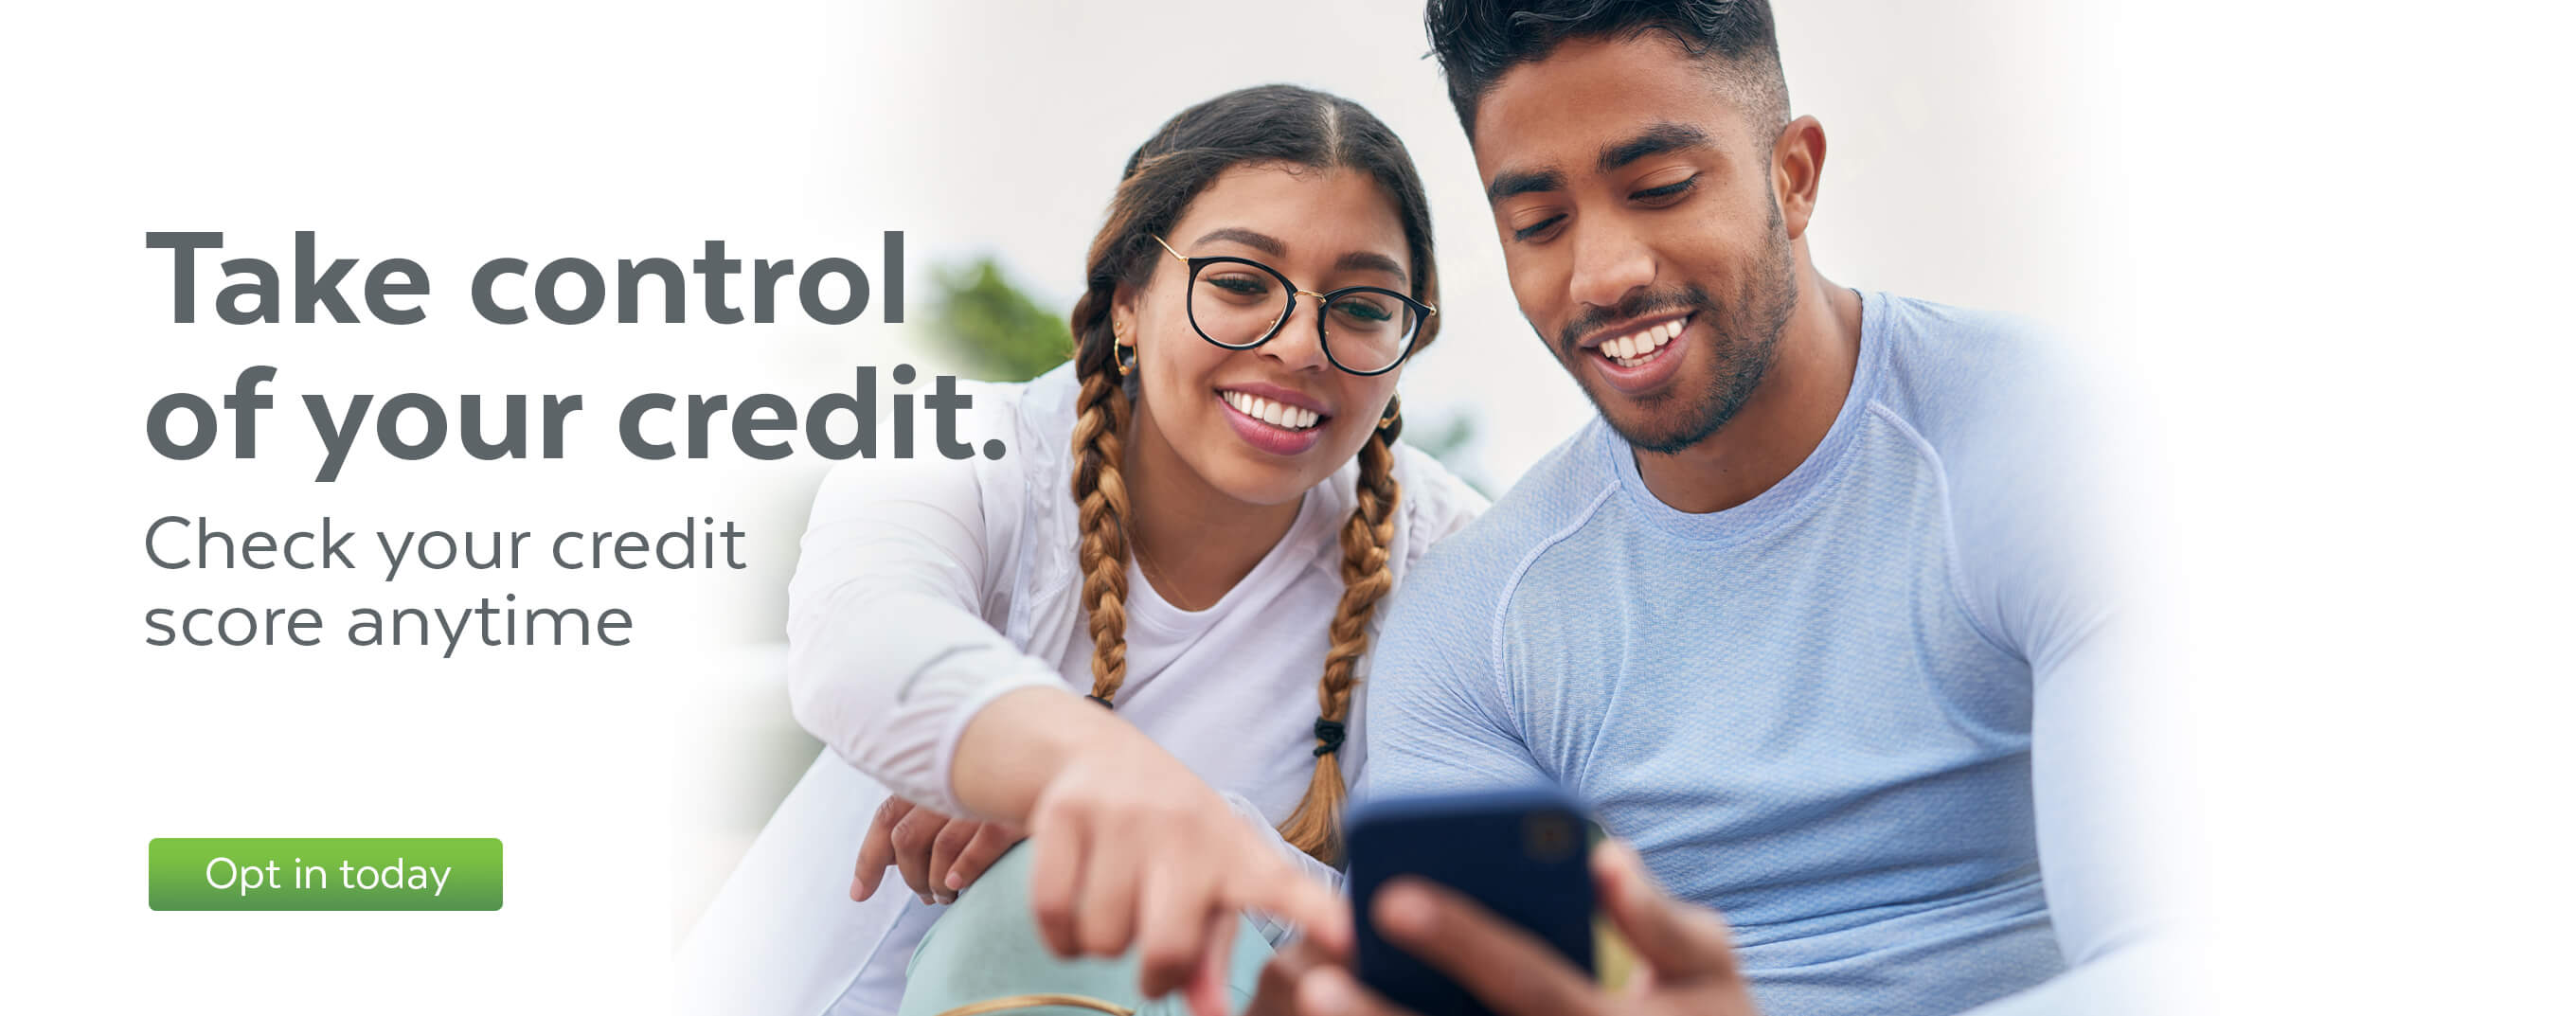 Take Control of Your Credit - Credit Score